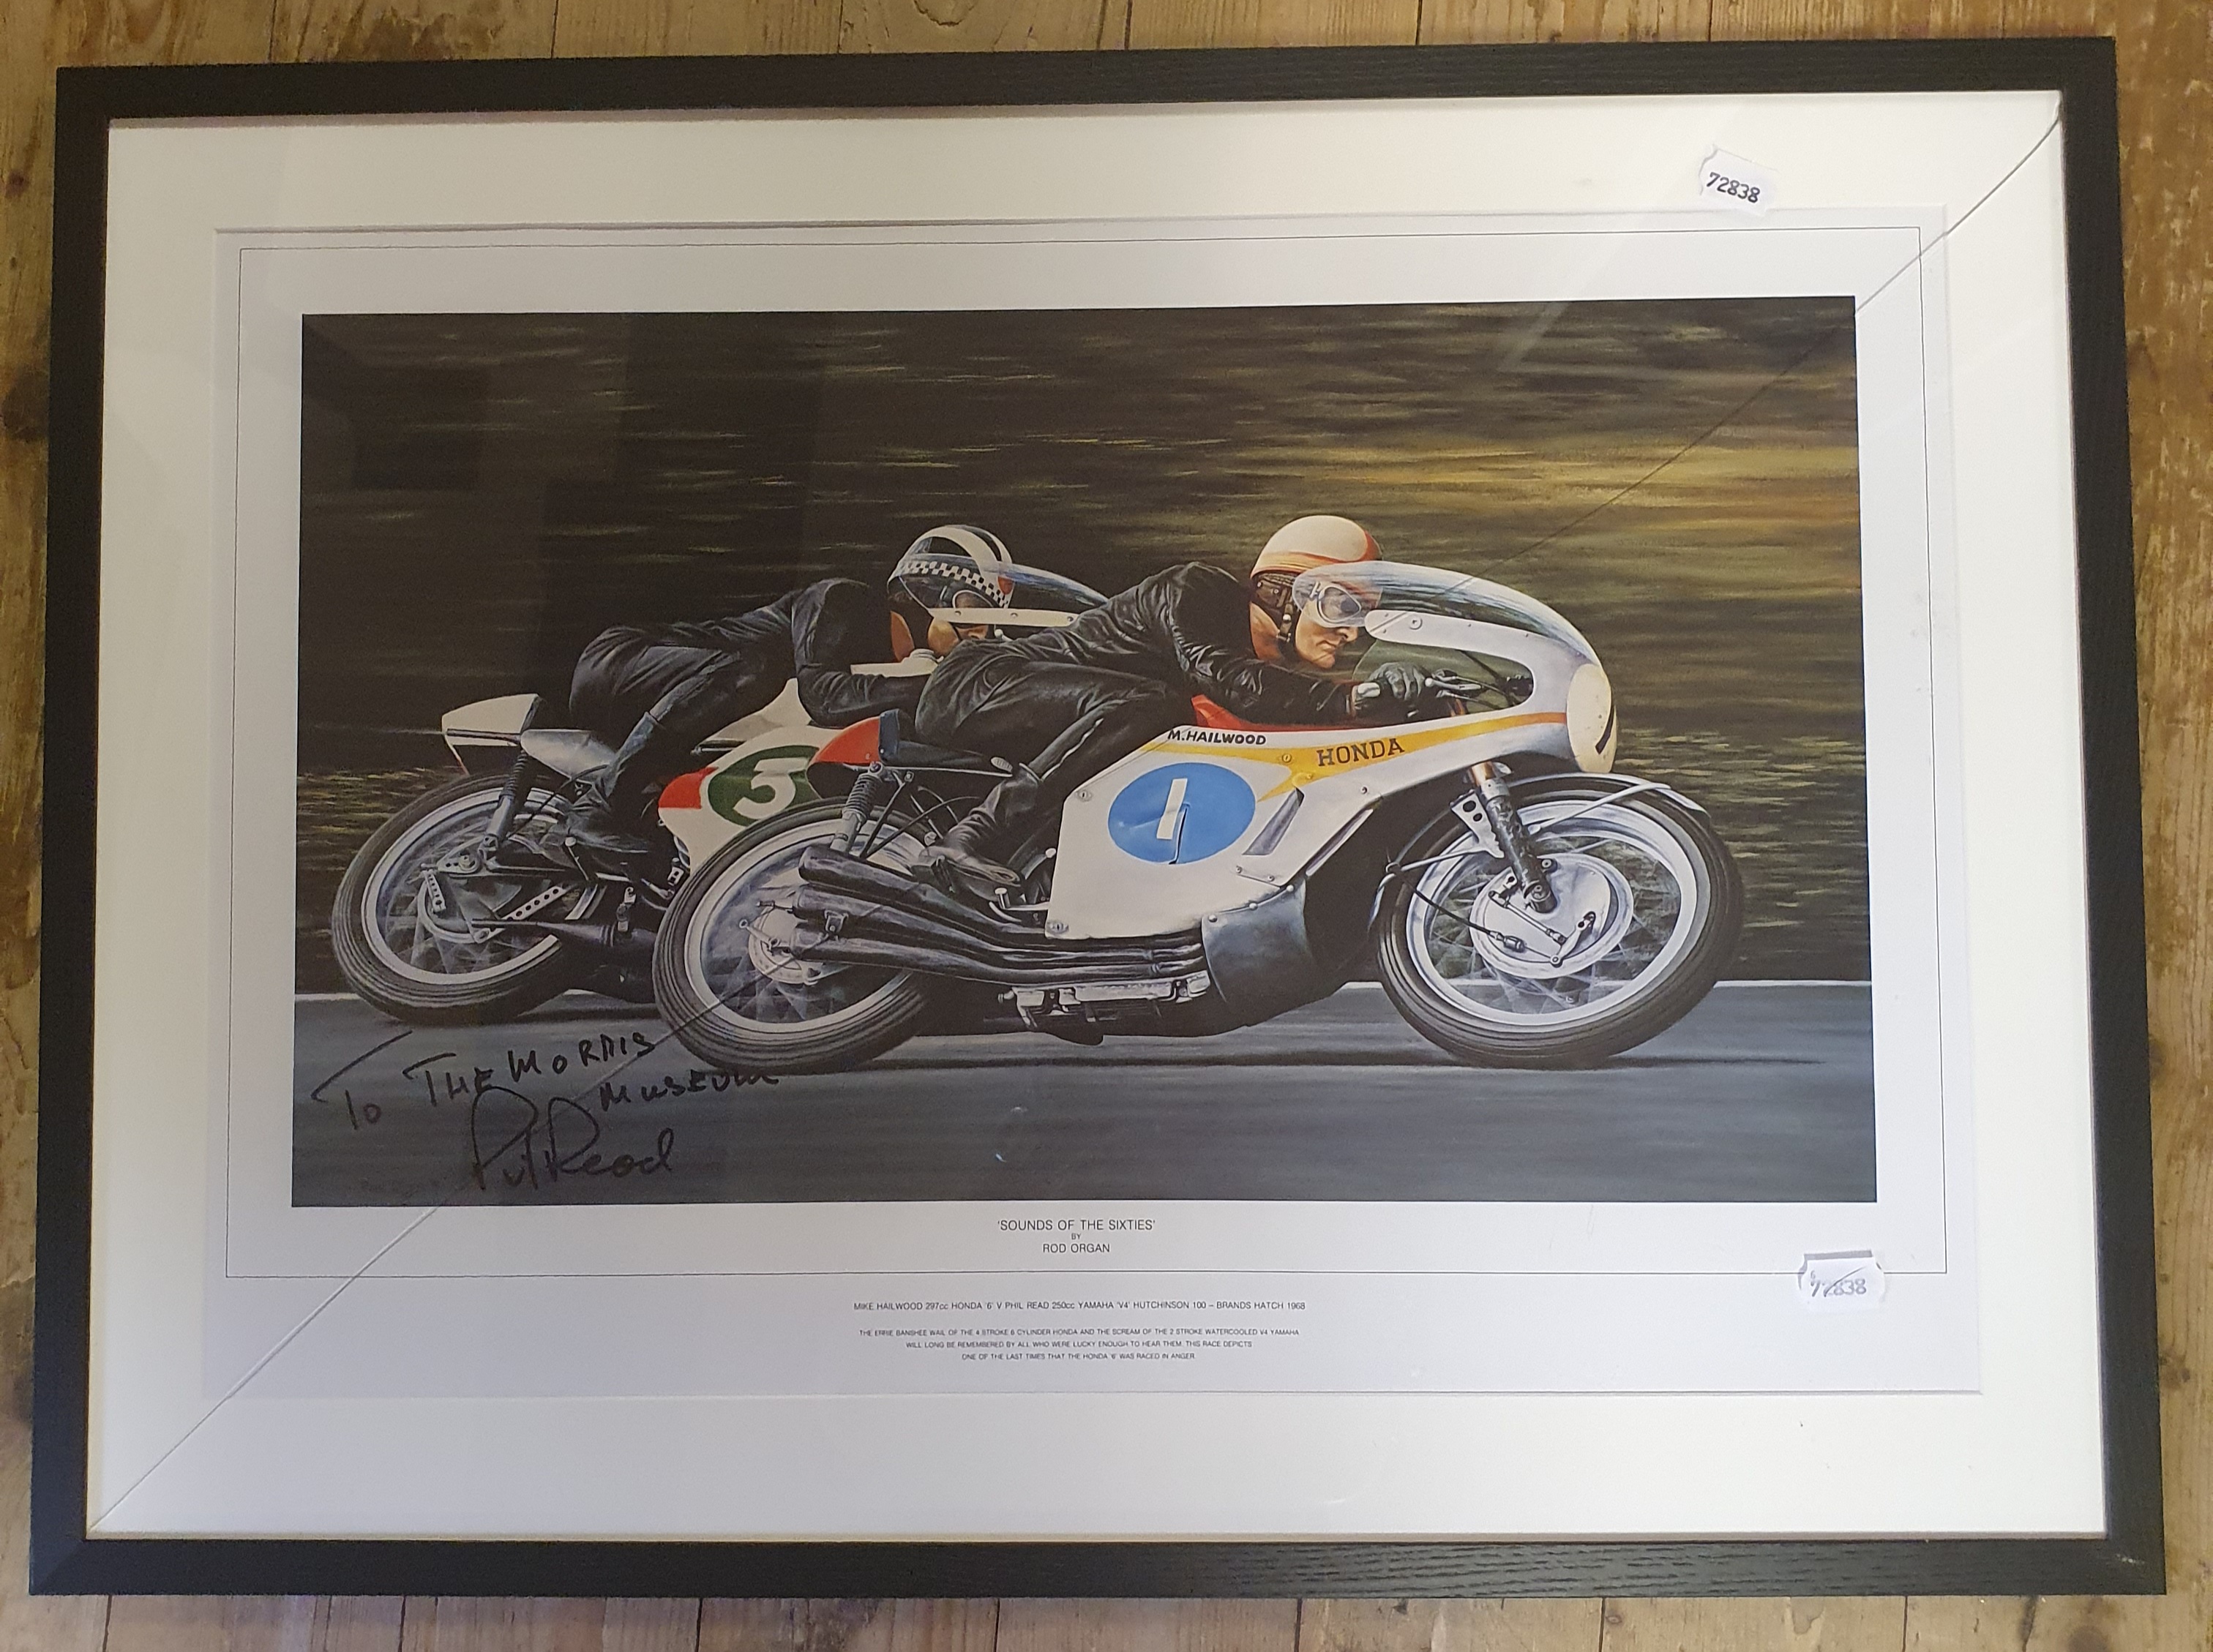 Rod Organ coloured print, Sounds of the Sixties, depicting Mike Hailwood and Phil Read dicing at